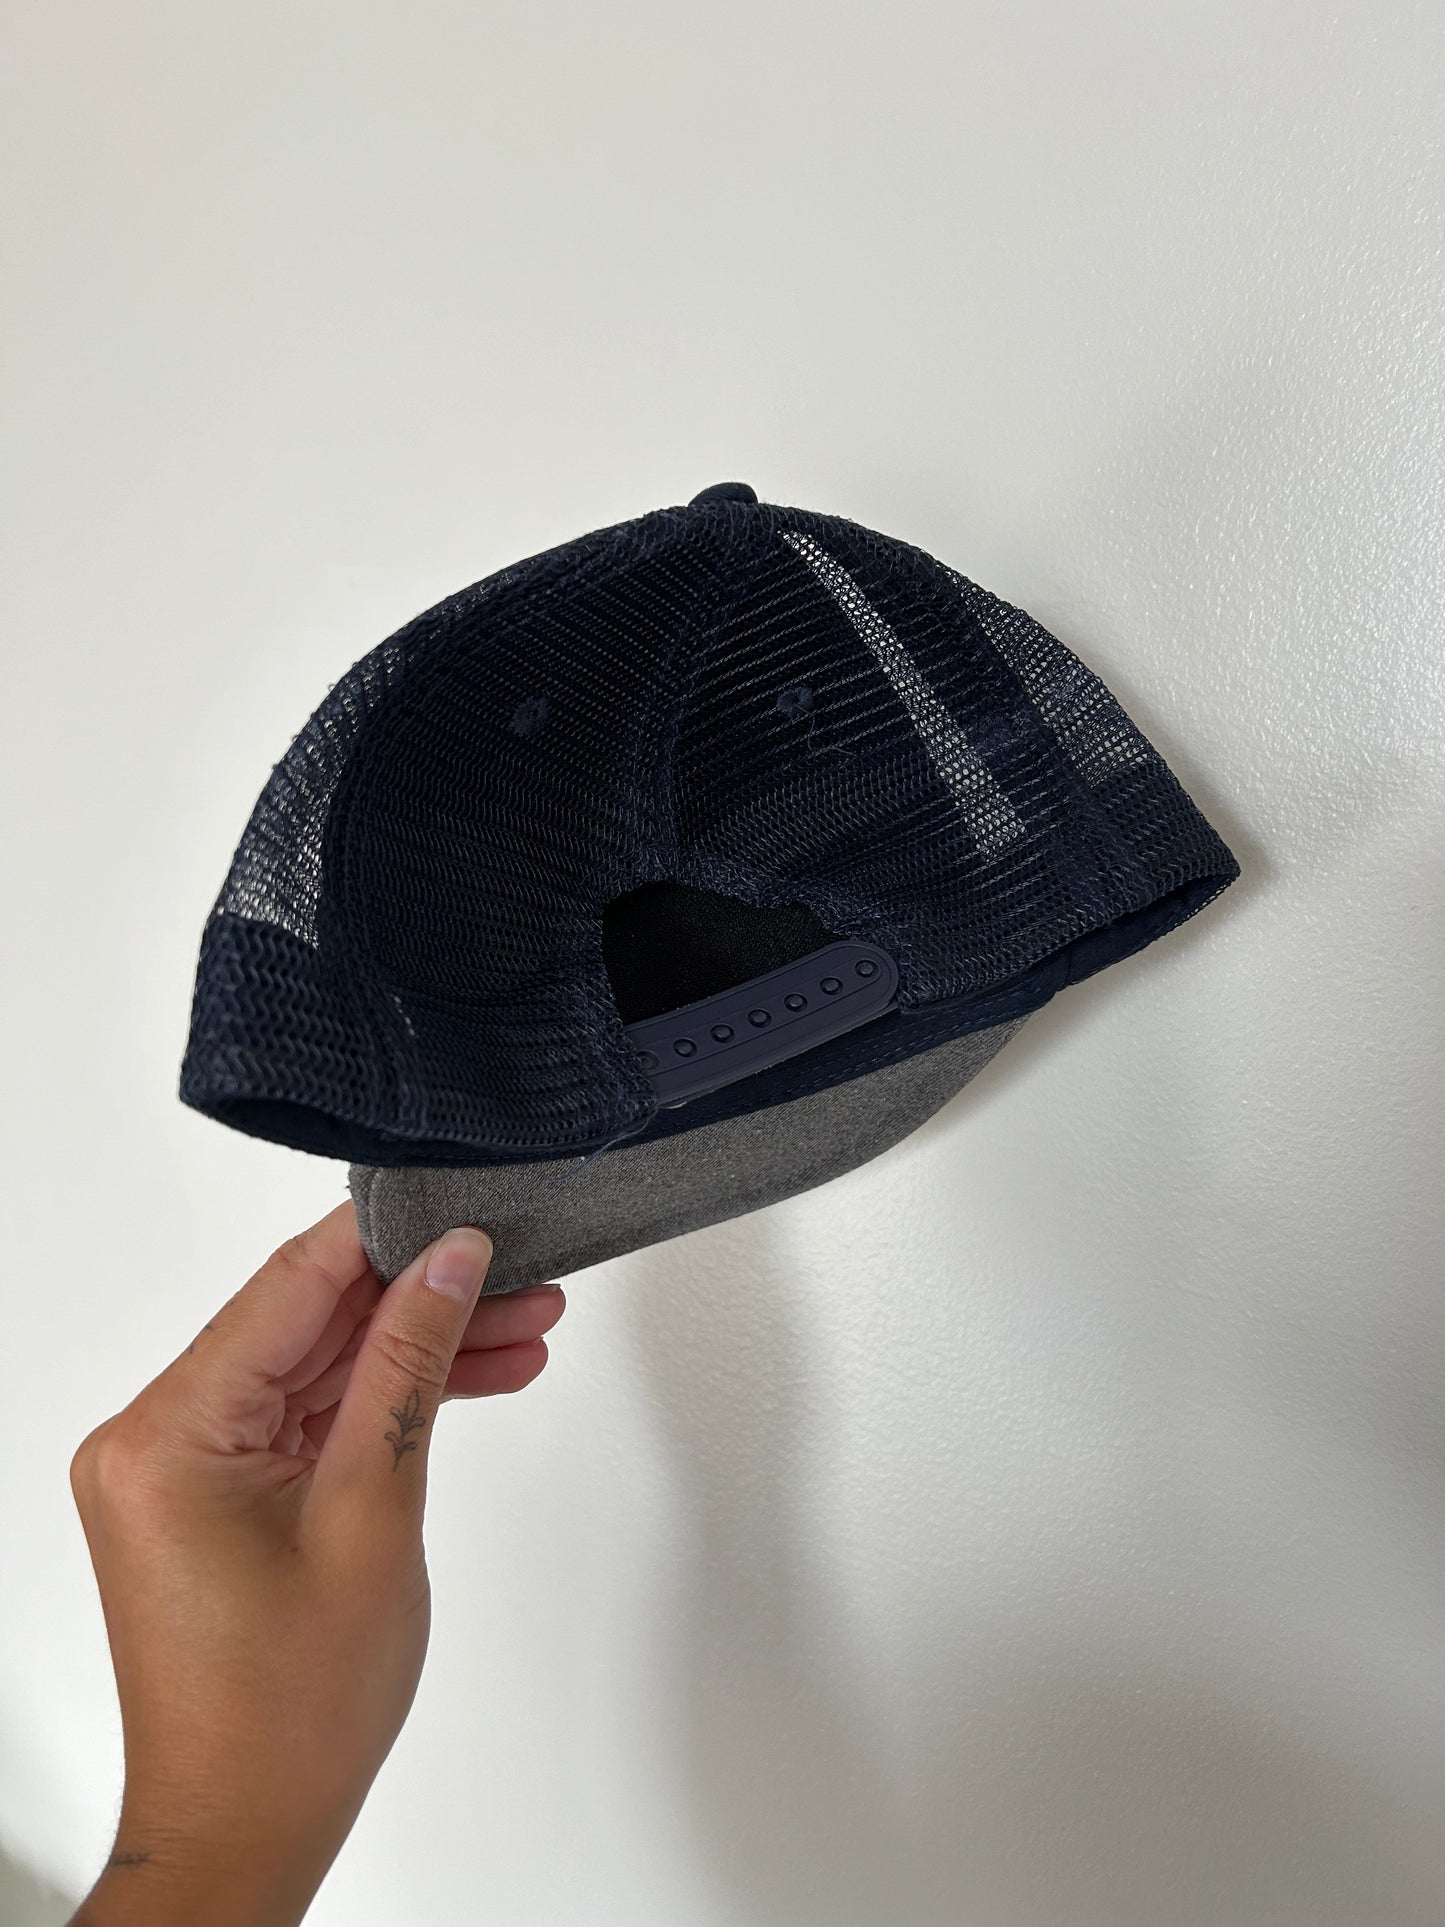 Adjustable cap - Fit 2 years and over (no label)